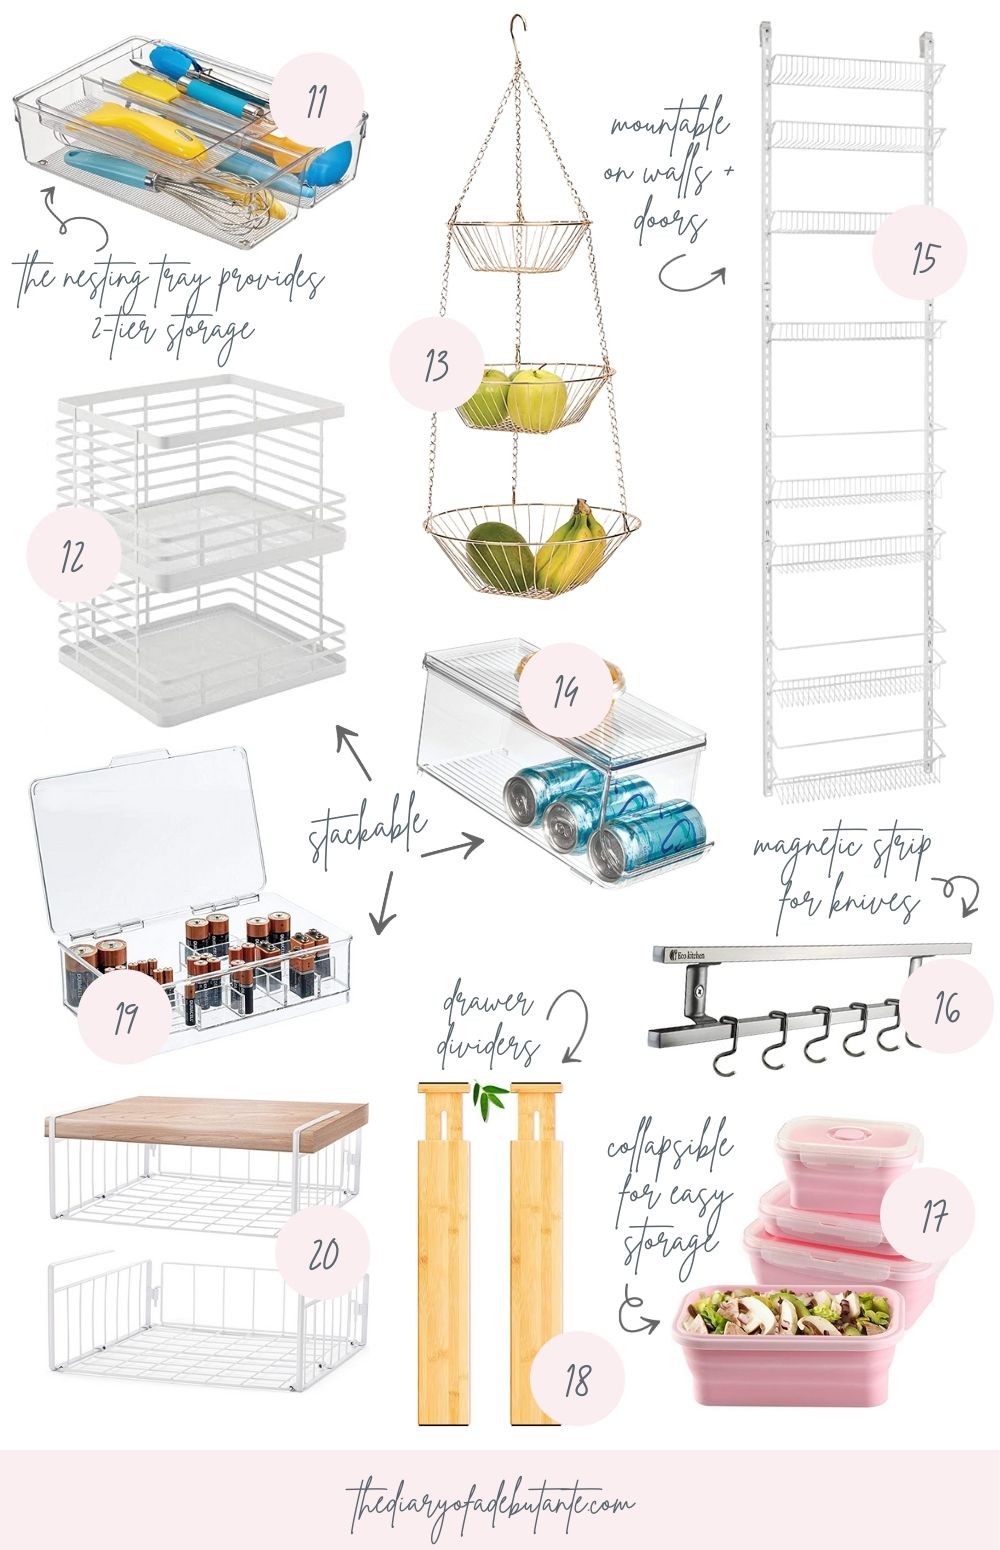 Blogger Stephanie Ziajka shares affordable organization ideas for small kitchens on Diary of a Debutante